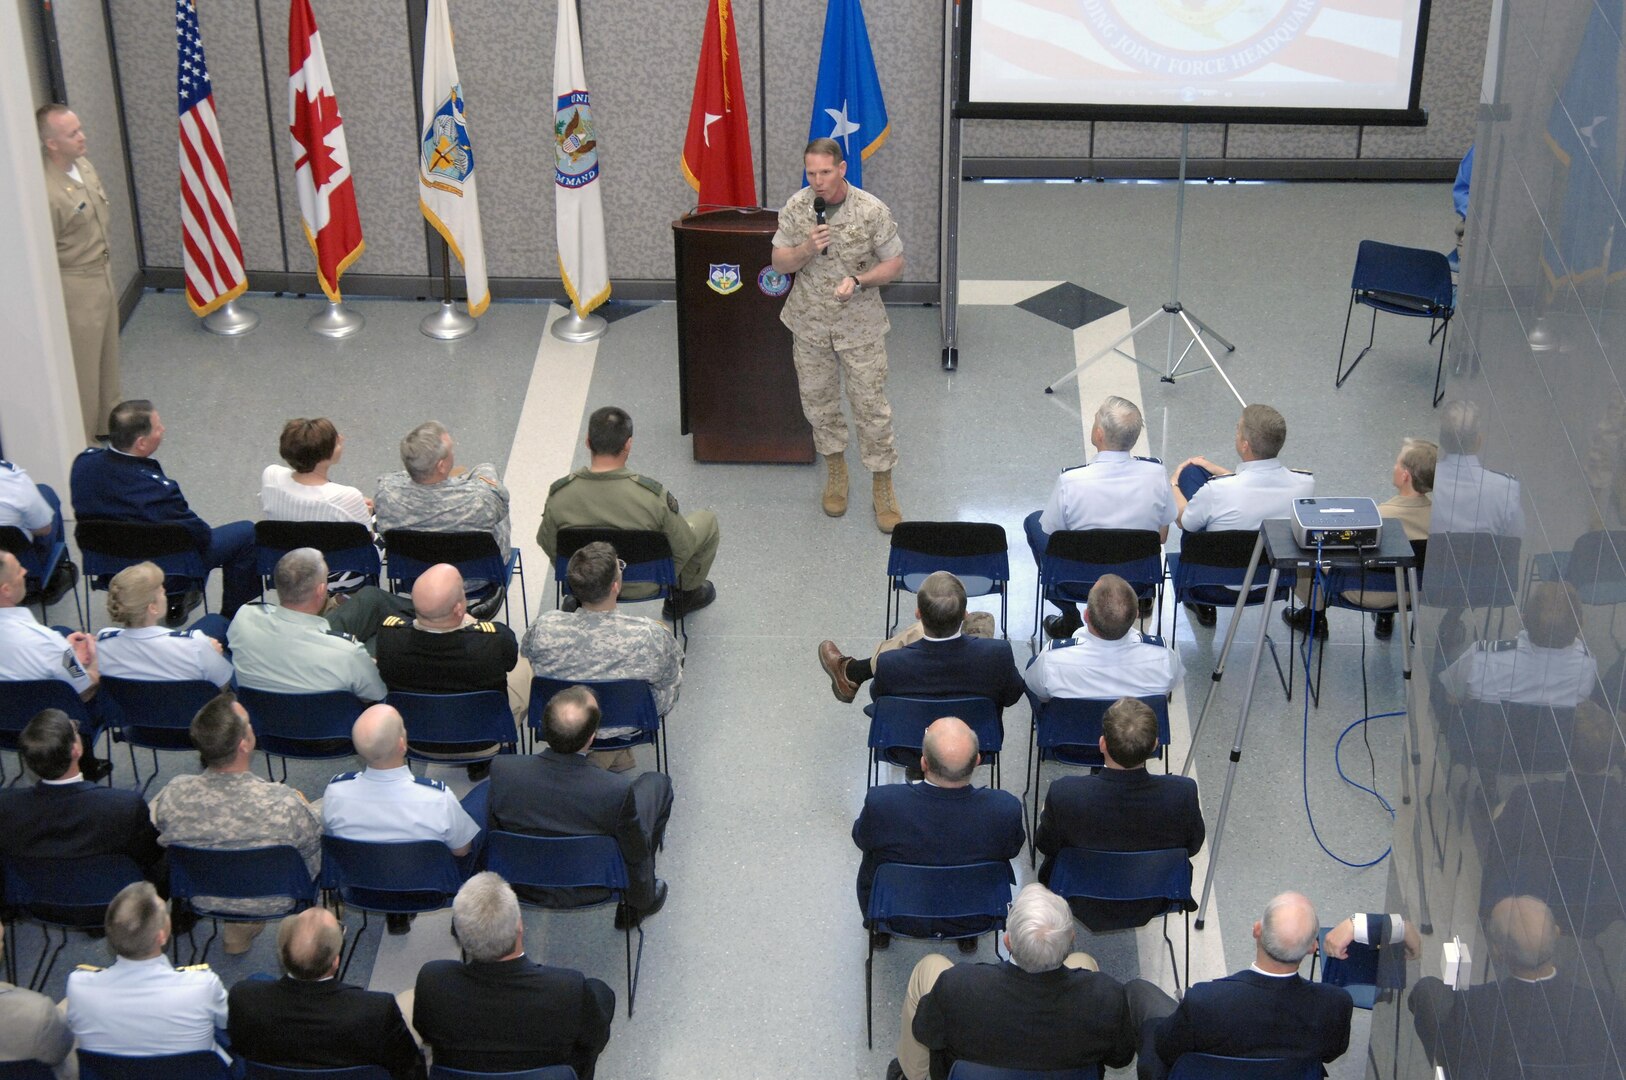 Marine Maj. Gen. Robert Walsh, U.S. Northern Command Operations Directorate director, welcomes members of the USNORTHCOM Standing Joint Force Headquarters to the Operations Directorate during the NC/SJFHQ disestablishment ceremony May 9. The NC/SJFHQ, the organization responsible for deploying the core of an emergency joint task force to contingencies across the country within six hours of mobilization, was folded into the USNORTHCOM Operations Directorate after seven years of operation as a separate directorate. 

